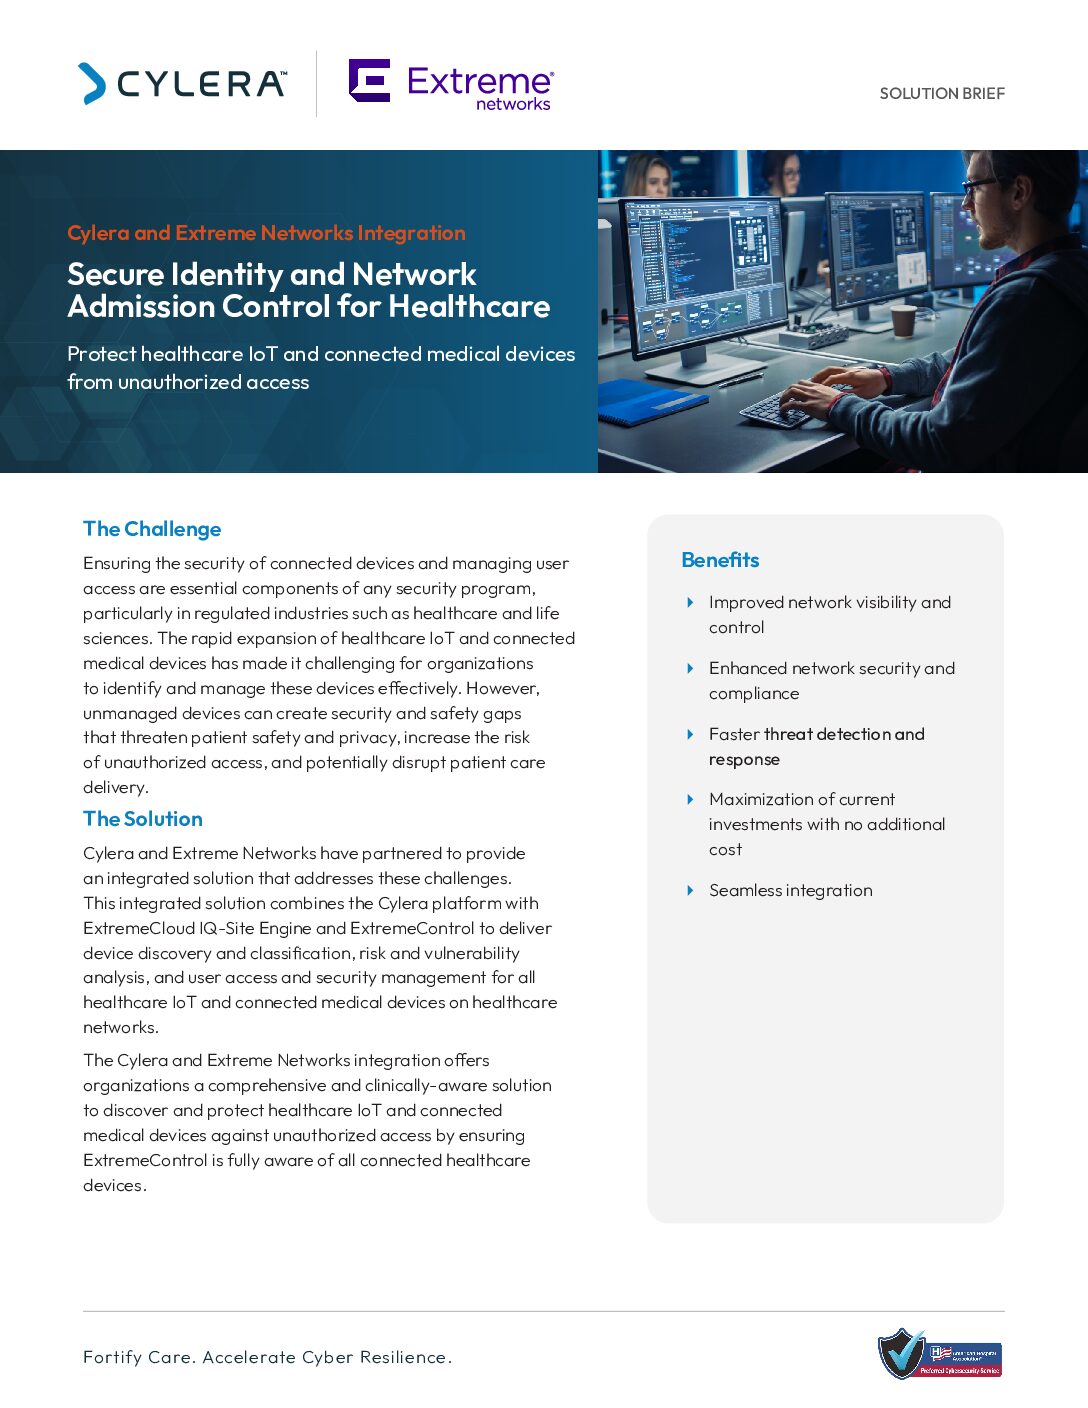 Featured image for Cylera - Extreme Networks Integration Solution Brief